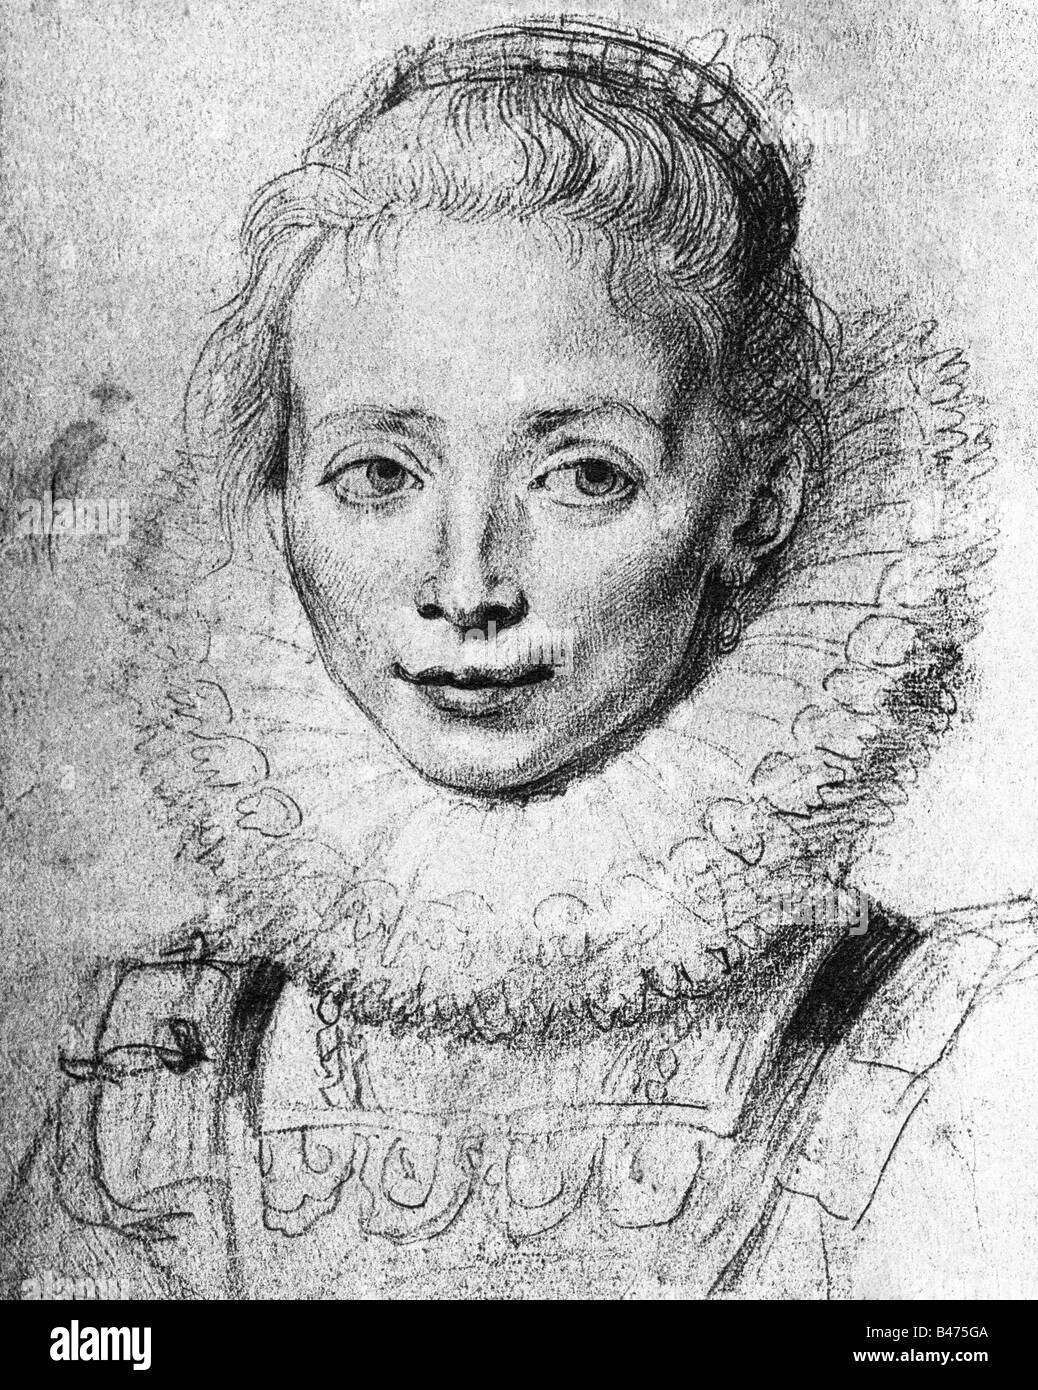 Rubens, Peter Paul, 28.6.1577 - 30.5.1640, pittore olandese, 'Lady-In-Waiting to Infanta Isabella', circa 1623, disegno, 35,3 x 28,5 cm, , Foto Stock